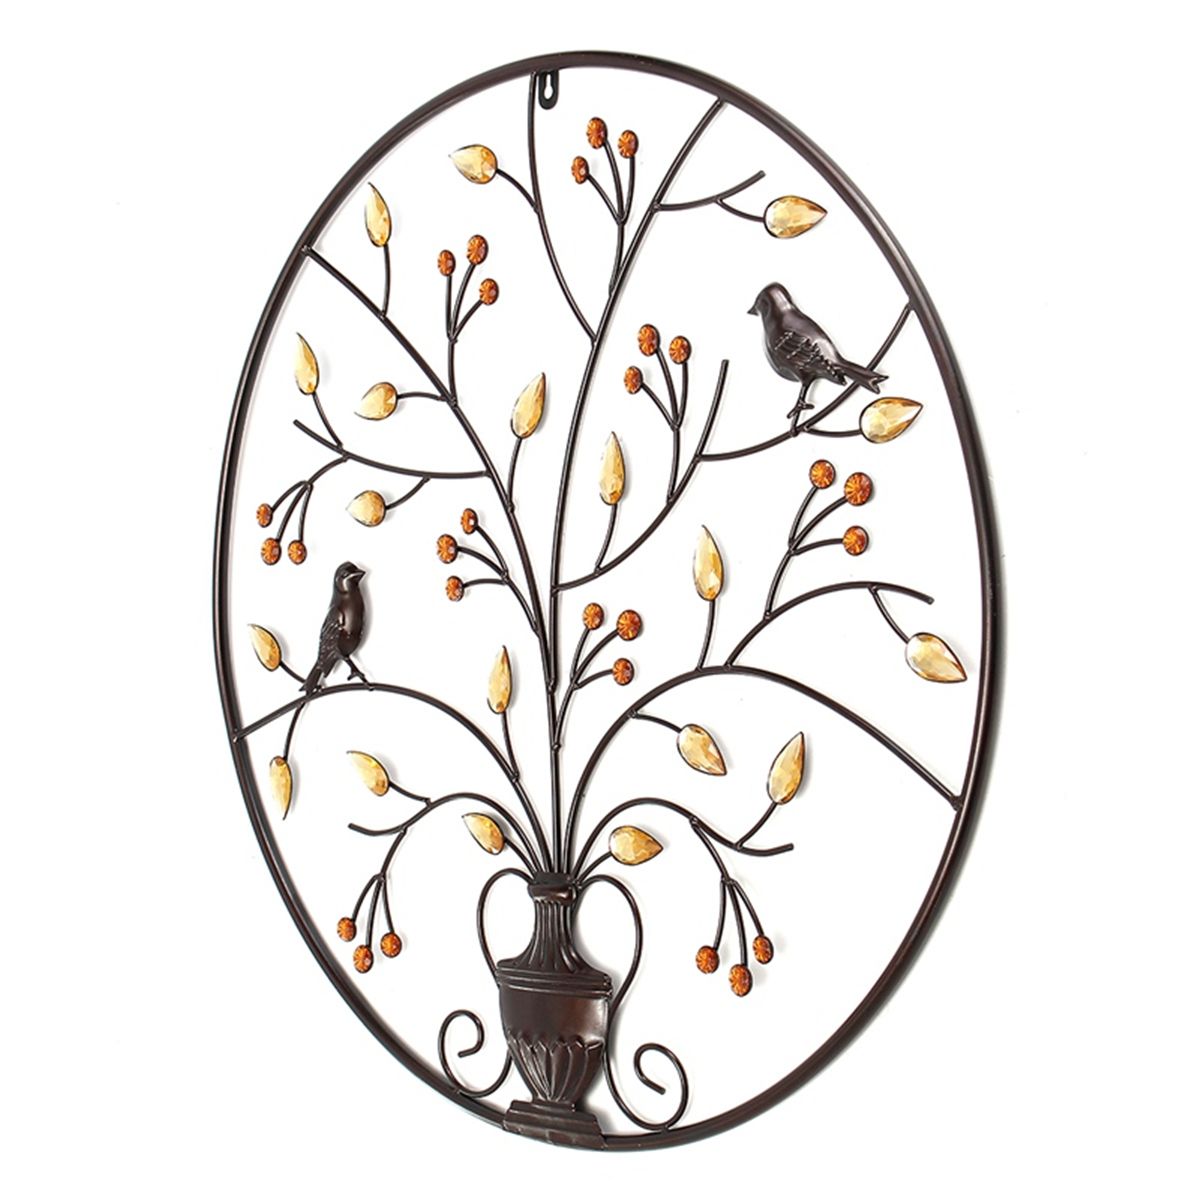 Birds-Tree-Iron-Sculpture-Ornament-Home-Room-Wall-Hanging-Decorations-1605156